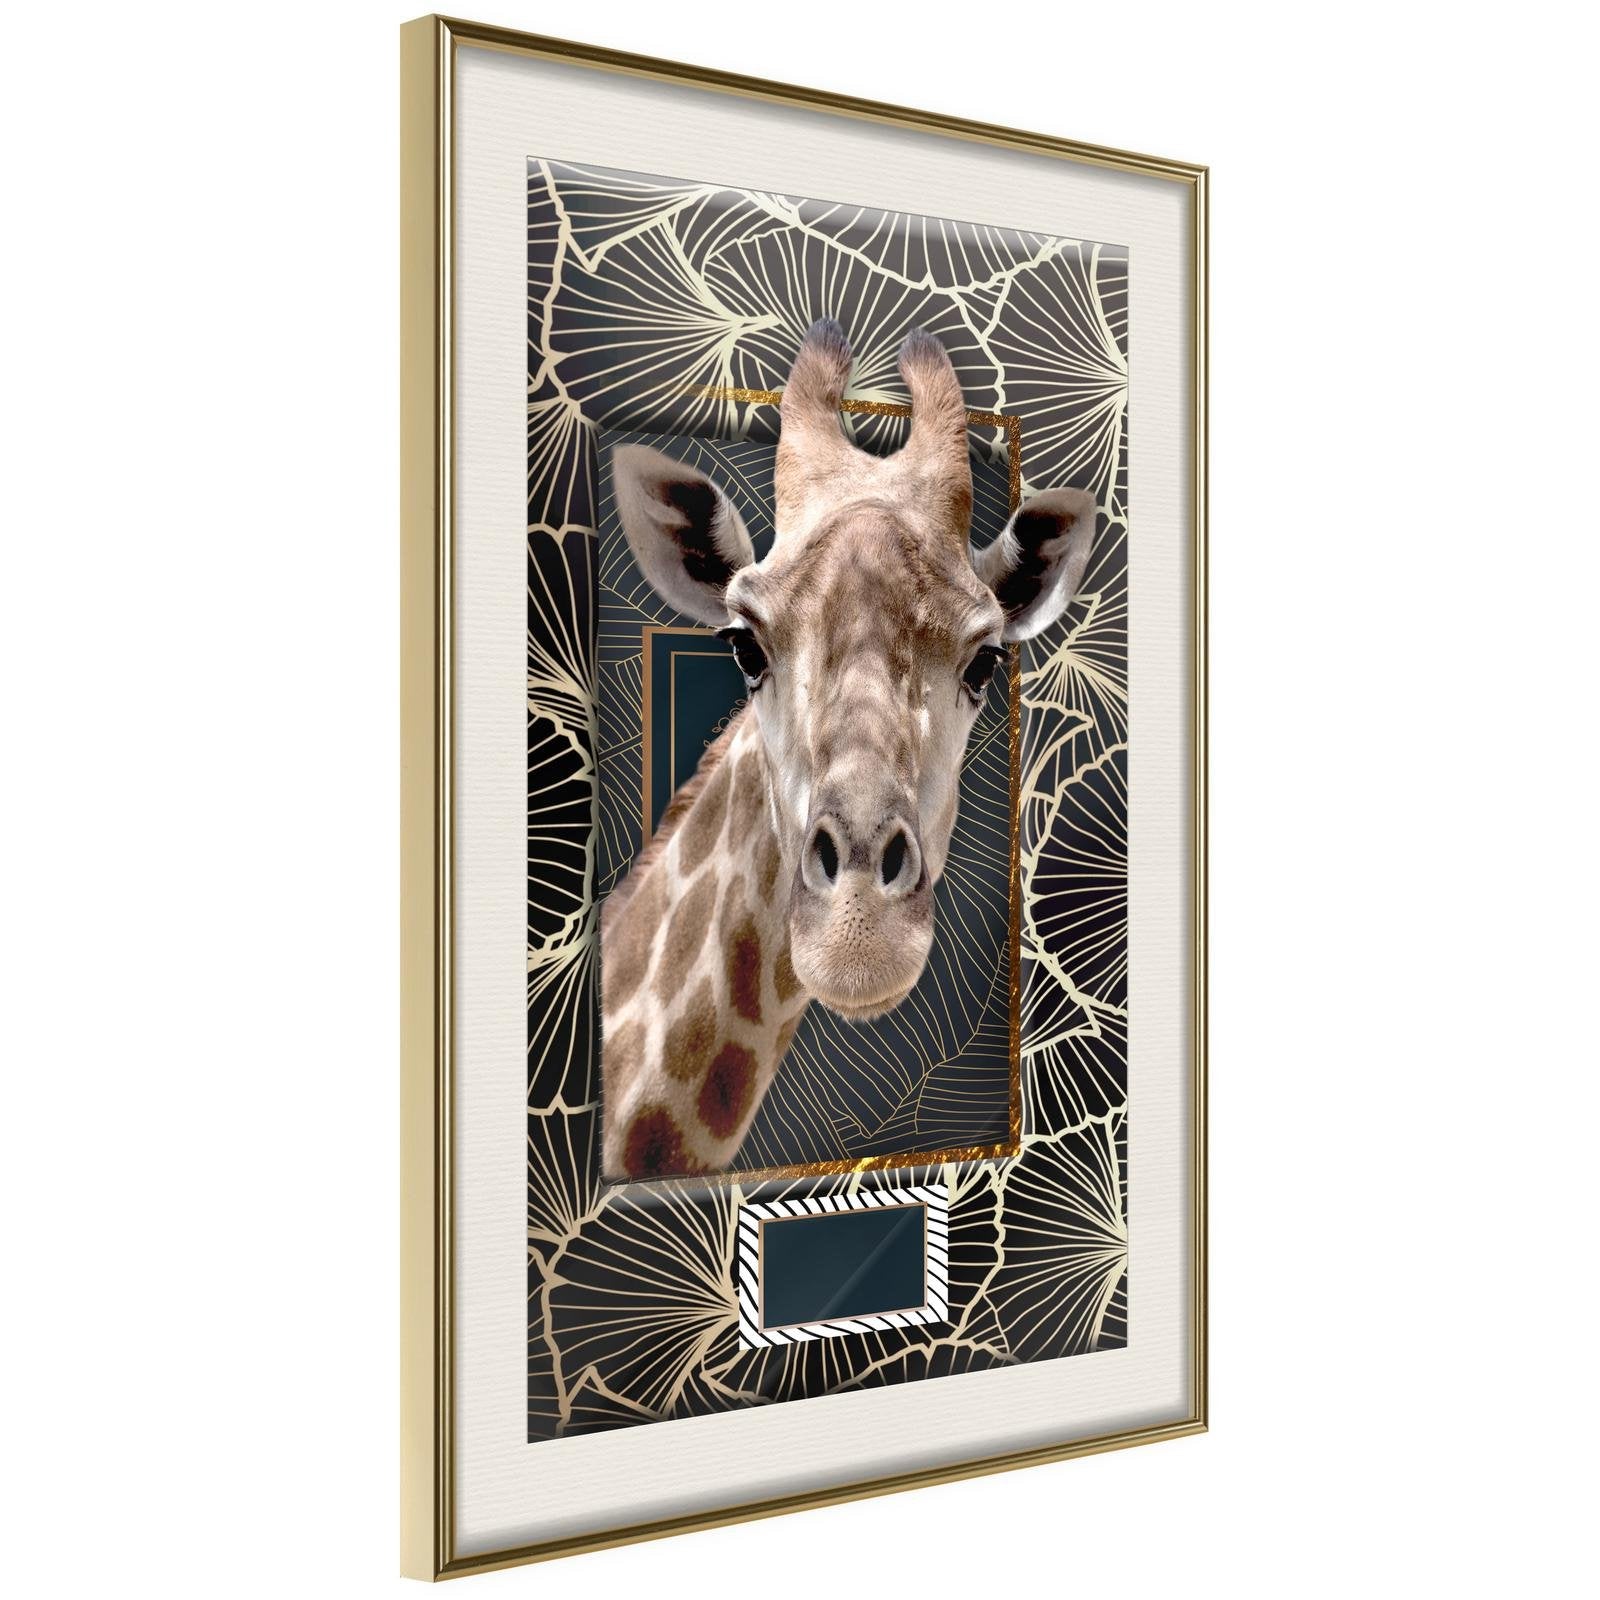 Inramad Poster / Tavla - Giraffe in the Frame-Poster Inramad-Artgeist-20x30-Guldram med passepartout-peaceofhome.se